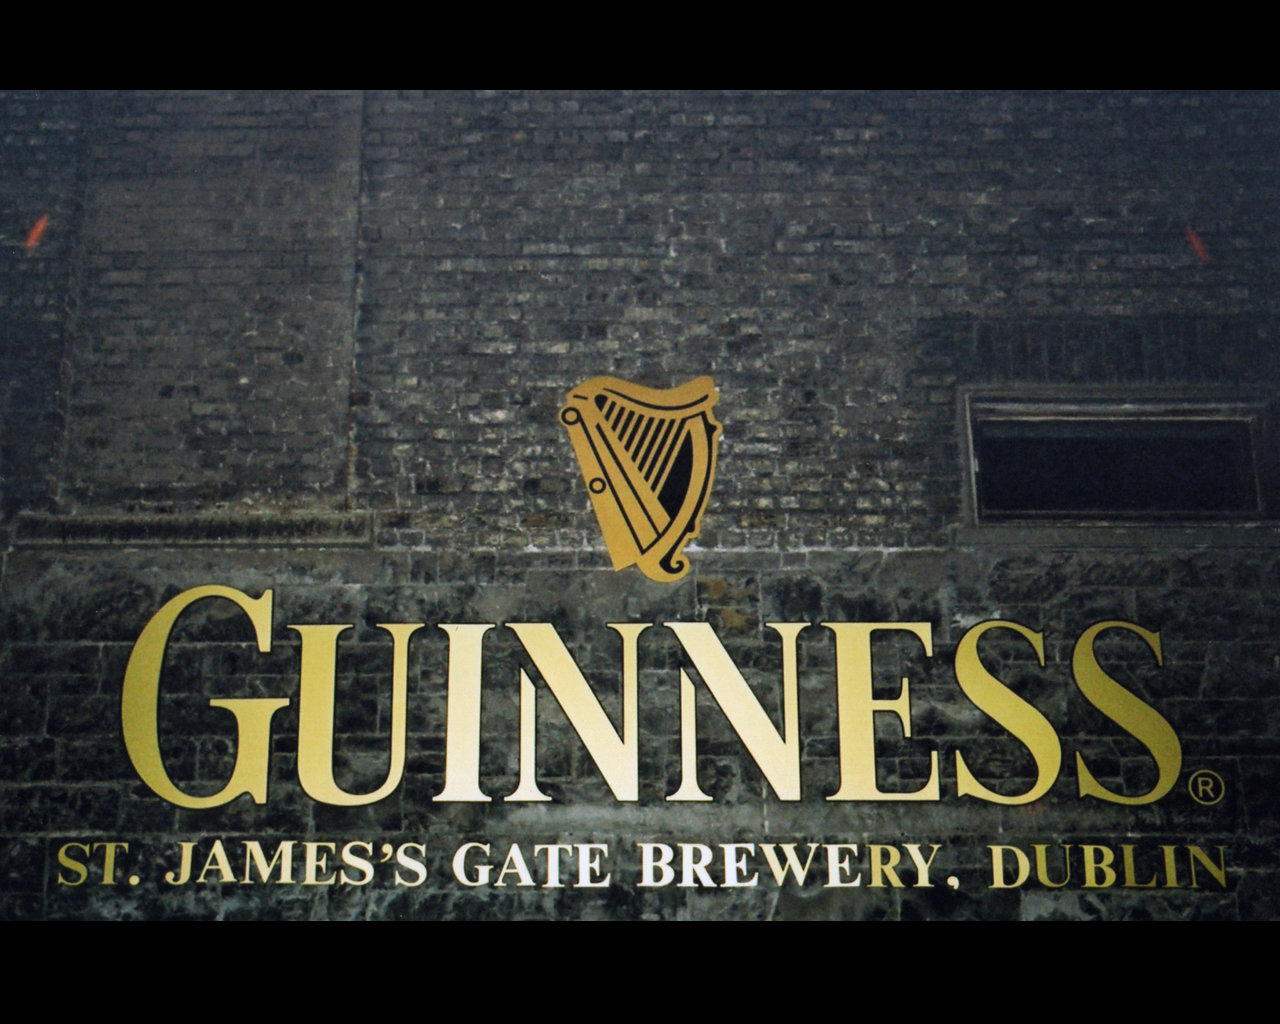 Guinness Android Wallpaper Image